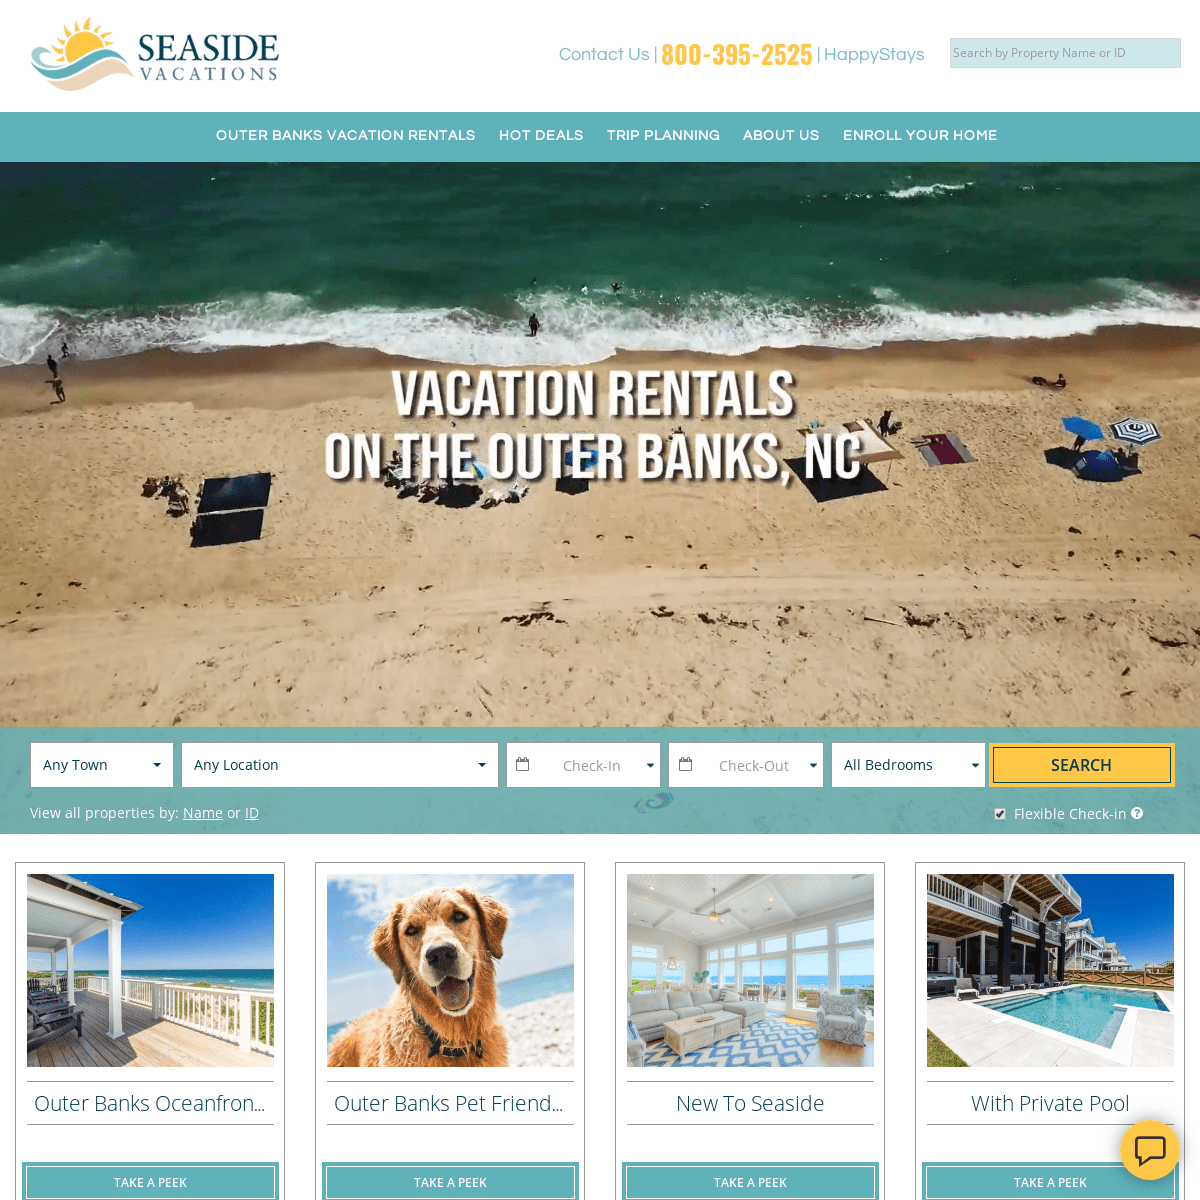 A complete backup of outerbanksvacations.com